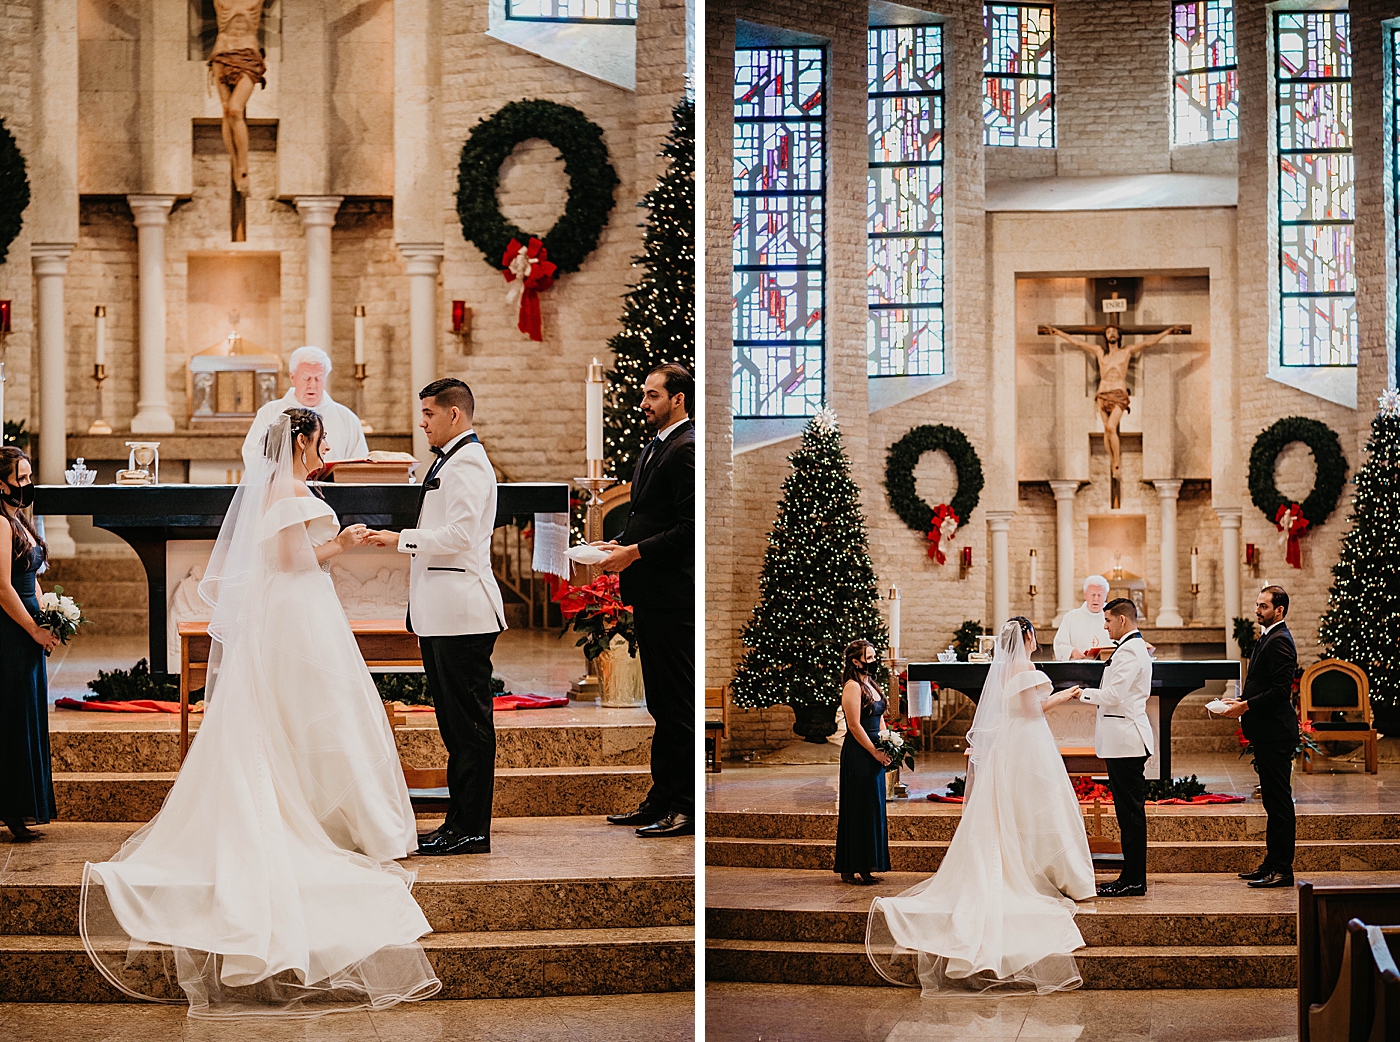 Bride and Groom at the alter holding hands homily Ceremony Lavan Venue Wedding Photography captured by South Florida Wedding Photographer Krystal Capone Photography